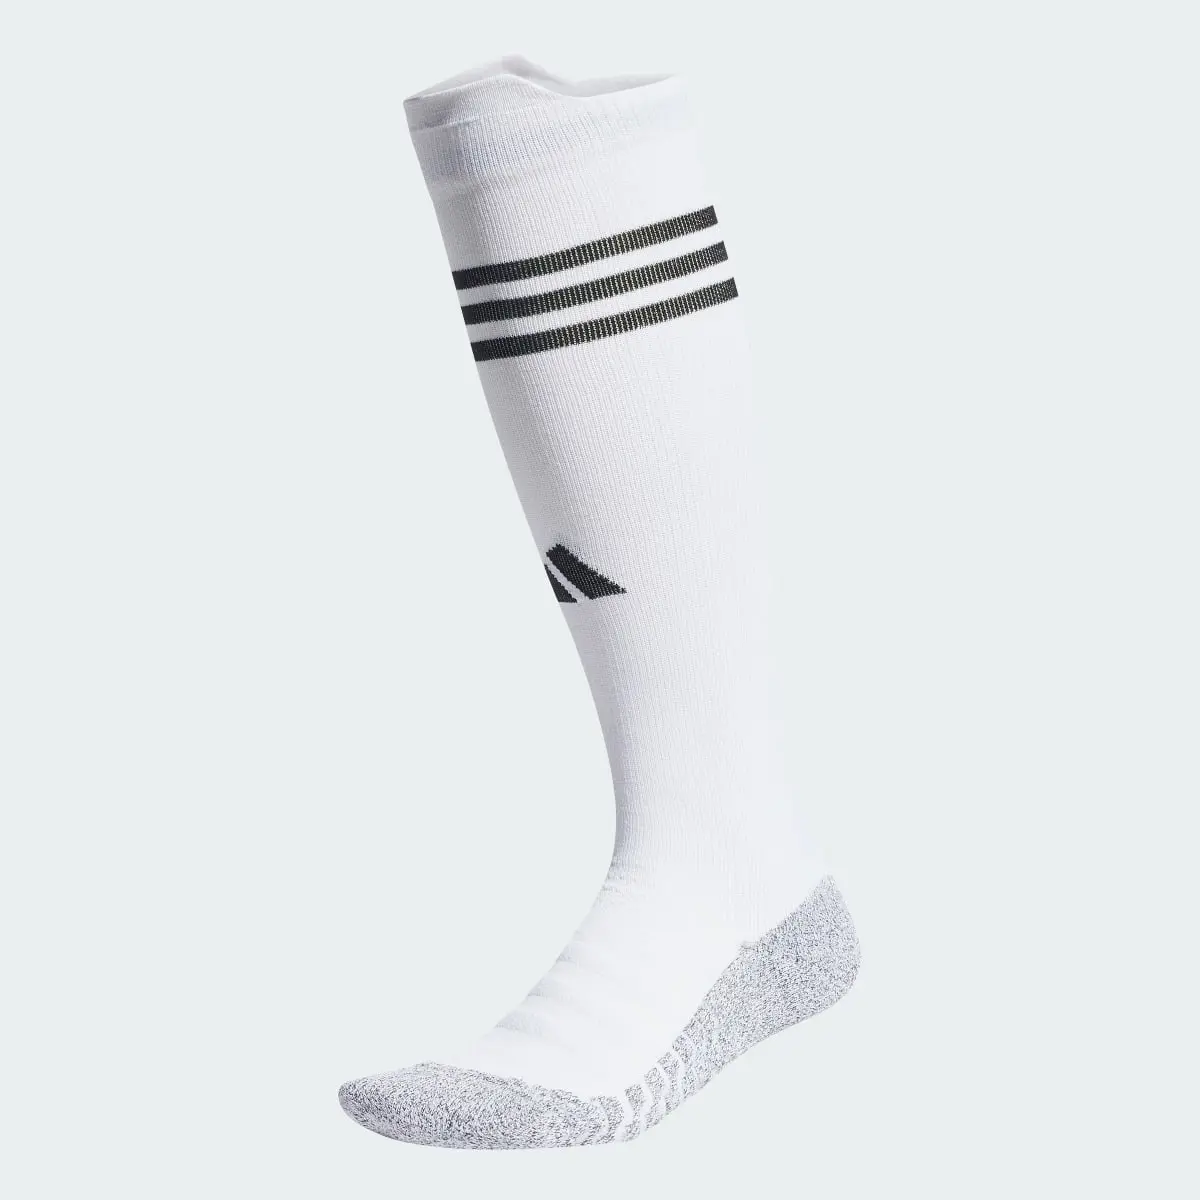 Adidas Chaussettes montantes All Blacks Rugby. 2